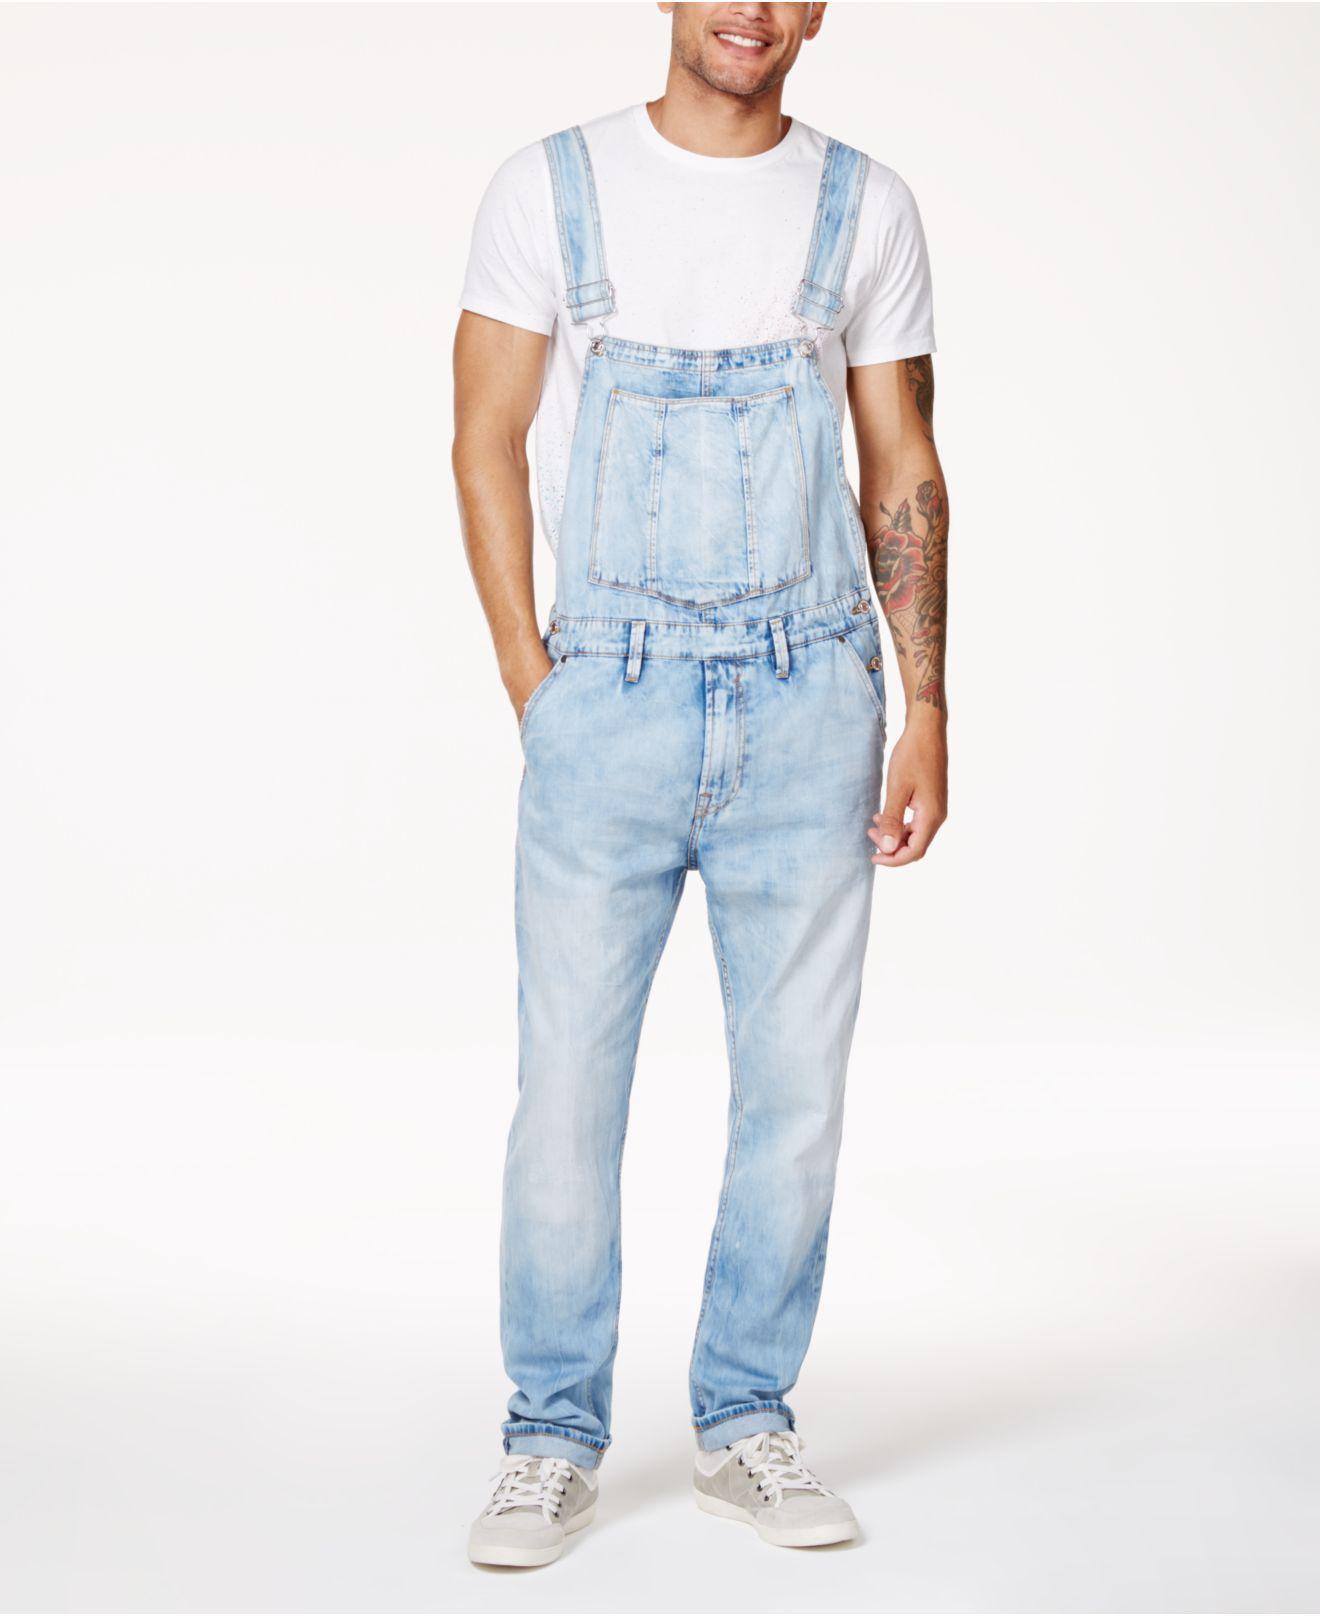 Guess Cotton Riverbed Stretch Overalls in Blue Men - Lyst